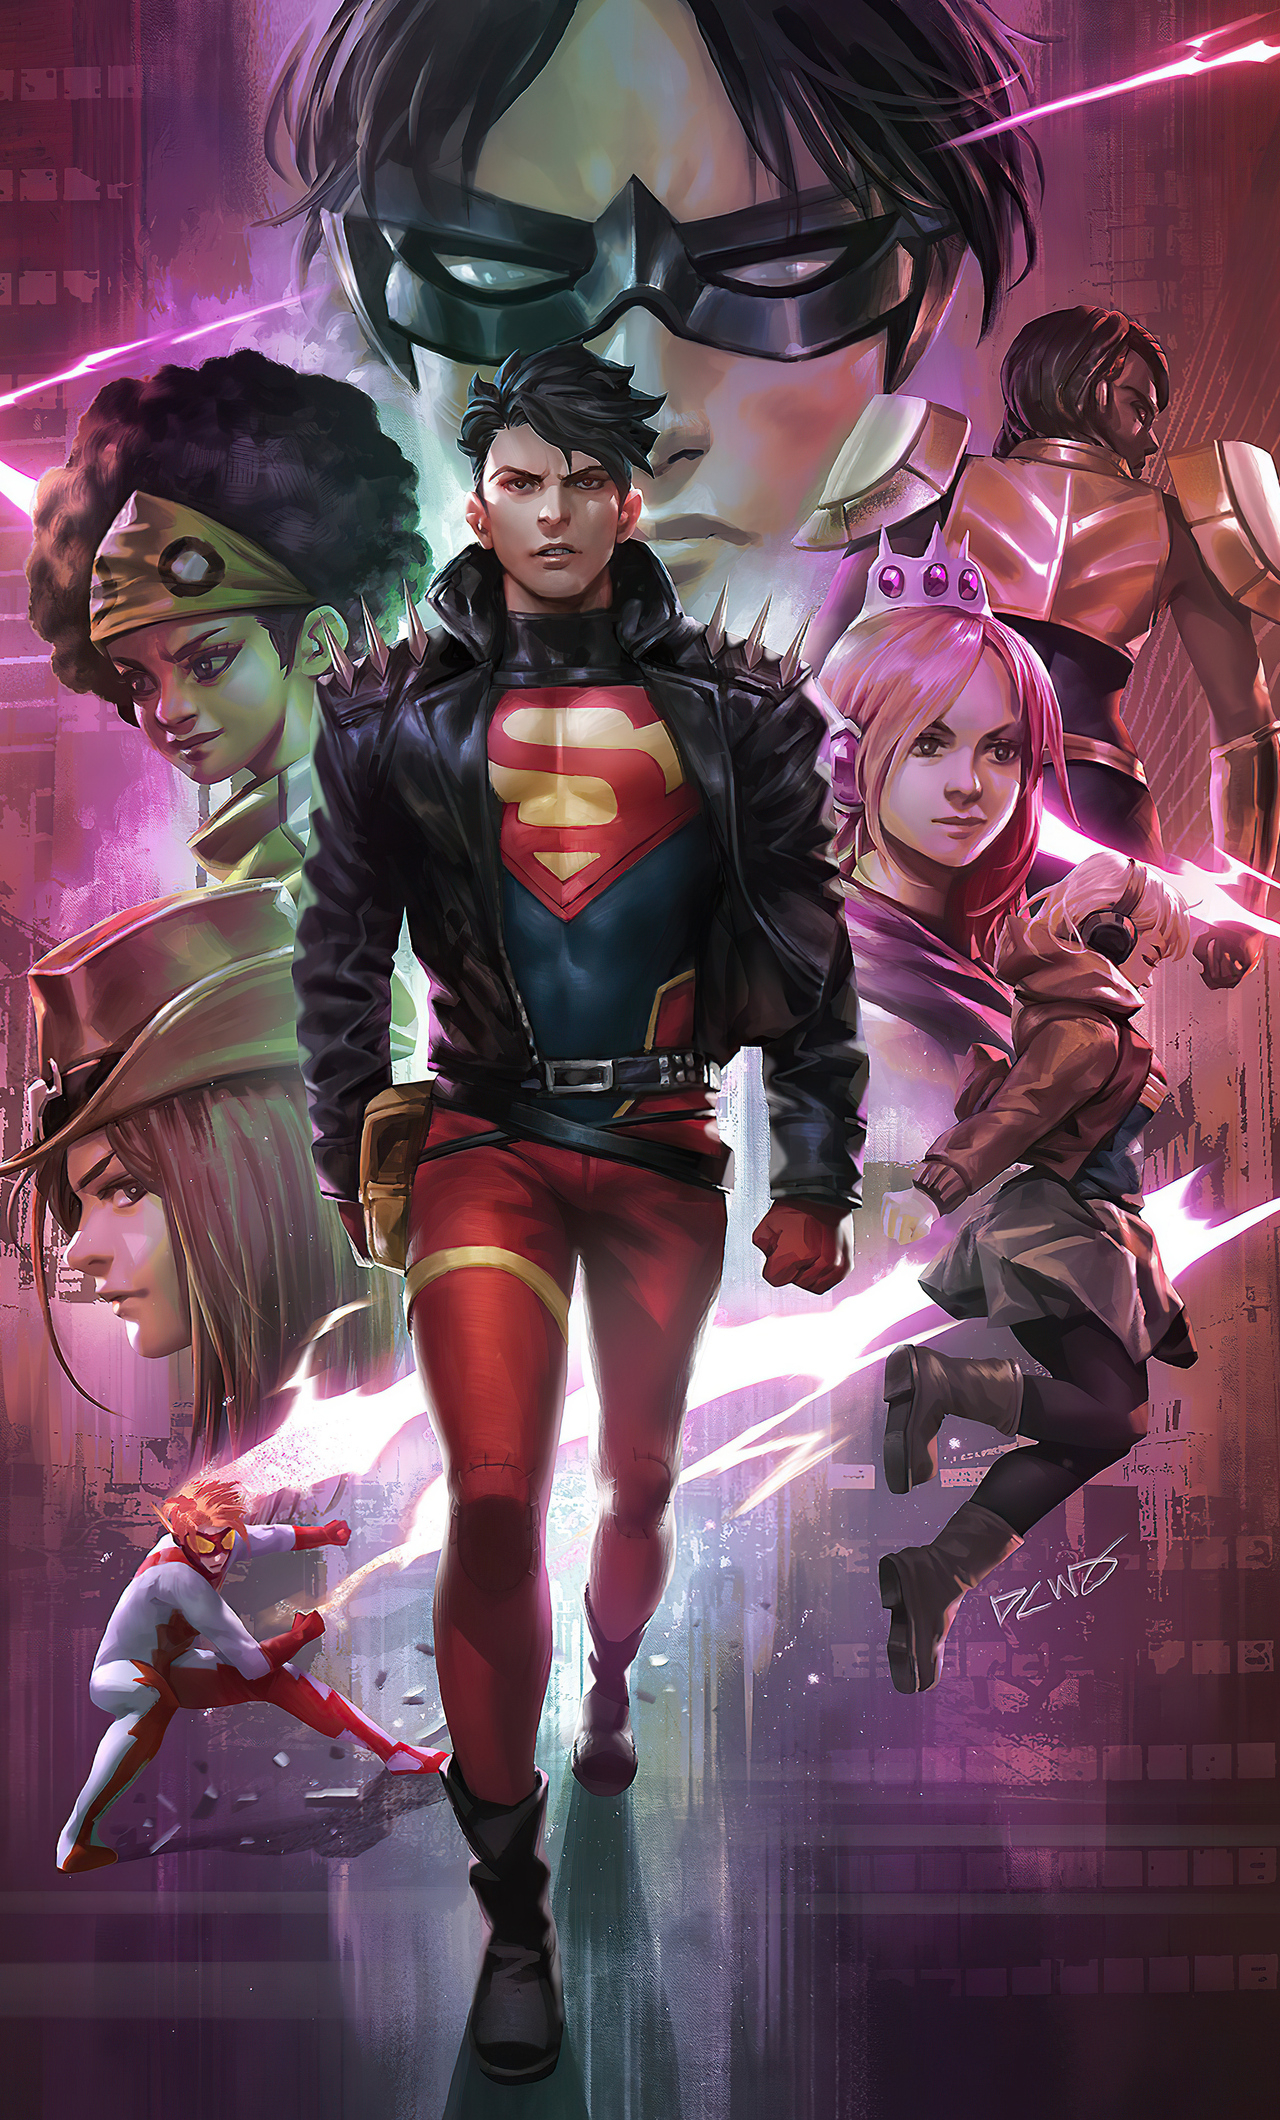 1280x2120 Dccomics Youngjustice Superboy Robin Impulse Jeenyhex Teenlantern Naomi Wondergirl Amythest iPhone 6+ HD 4k Wallpapers, Images, Backgrounds, Photos and Pictures